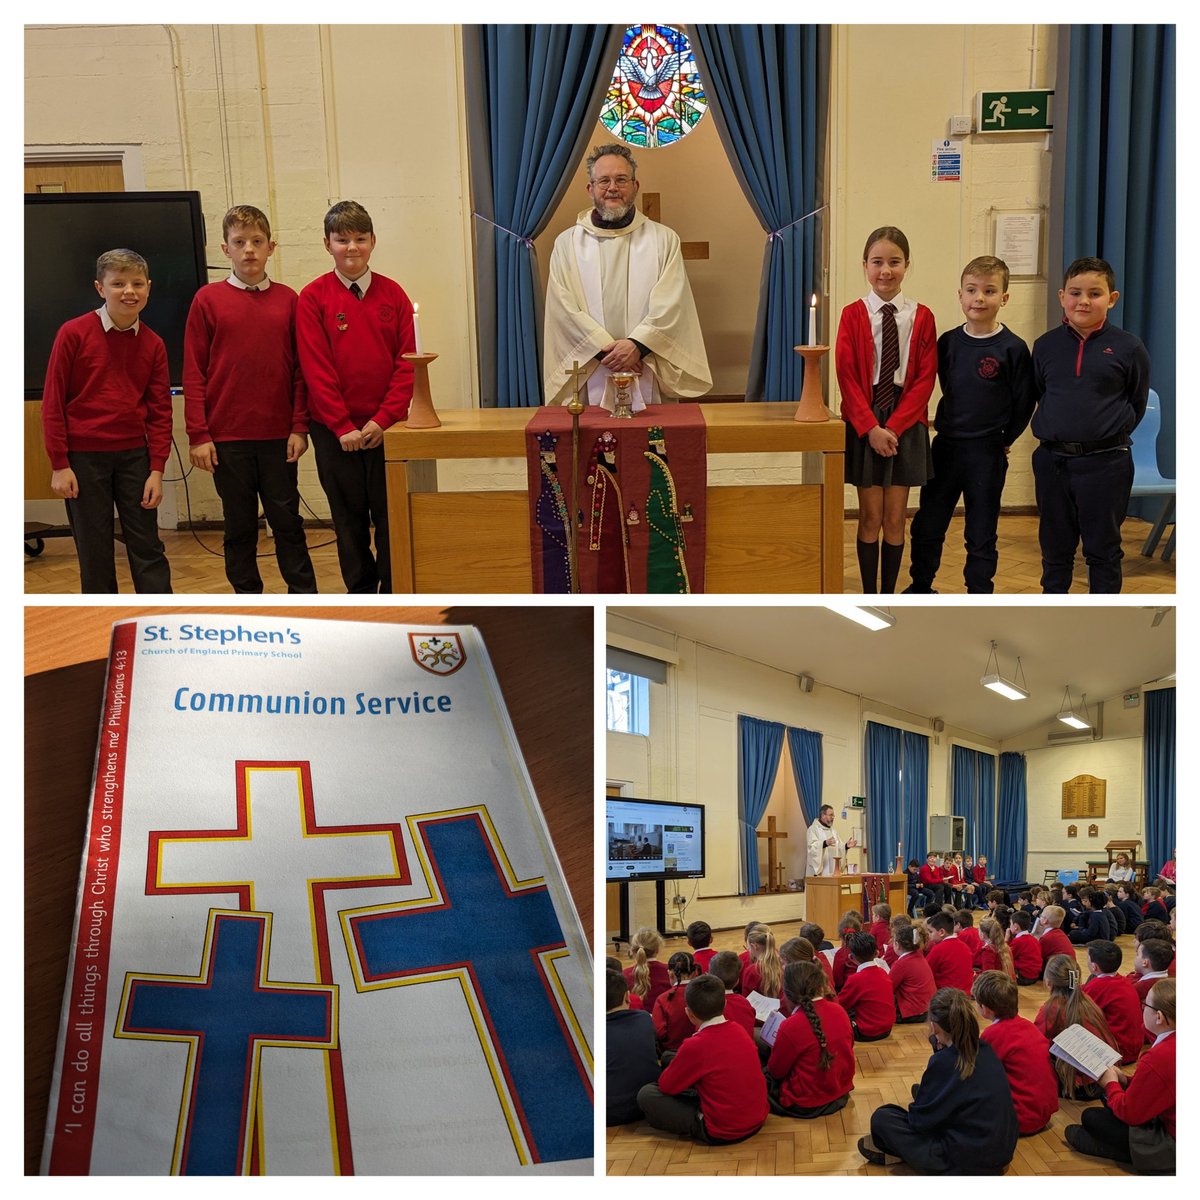 Very special to be a part of these children's spiritual journey as they took their first communion in a Eucharist service at school. Thanks Rev. Peter